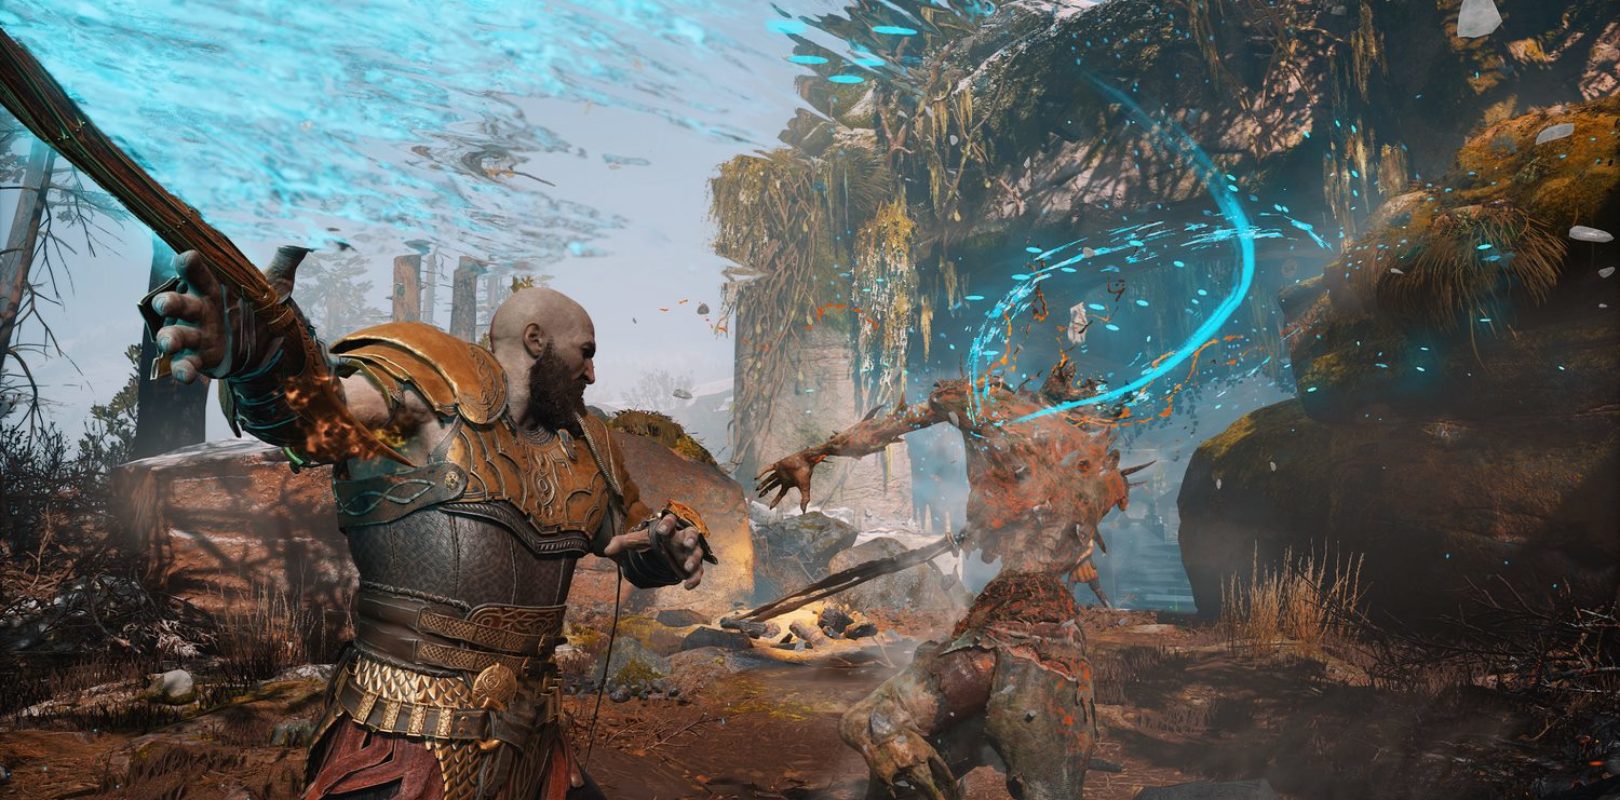 La forma difícil Clásico God of War New Game+ Mode Now Available | PrimeWikis